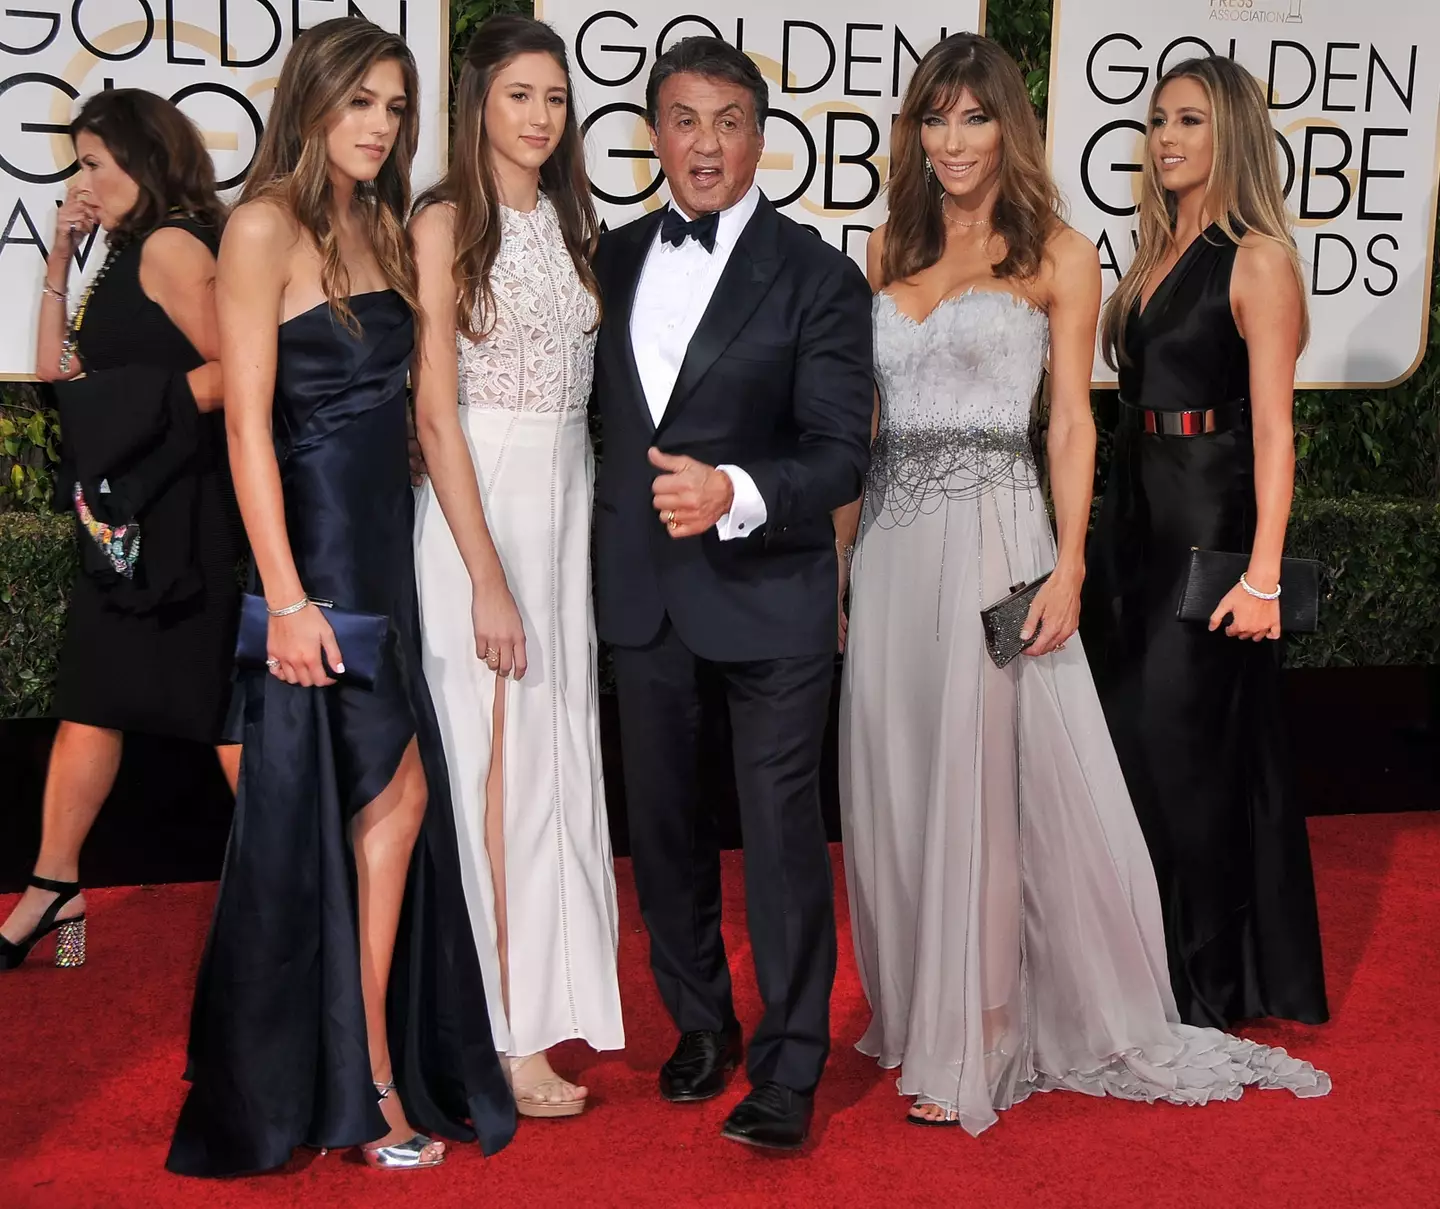 Stallone's daughters say he's very good at writing their breakup texts.